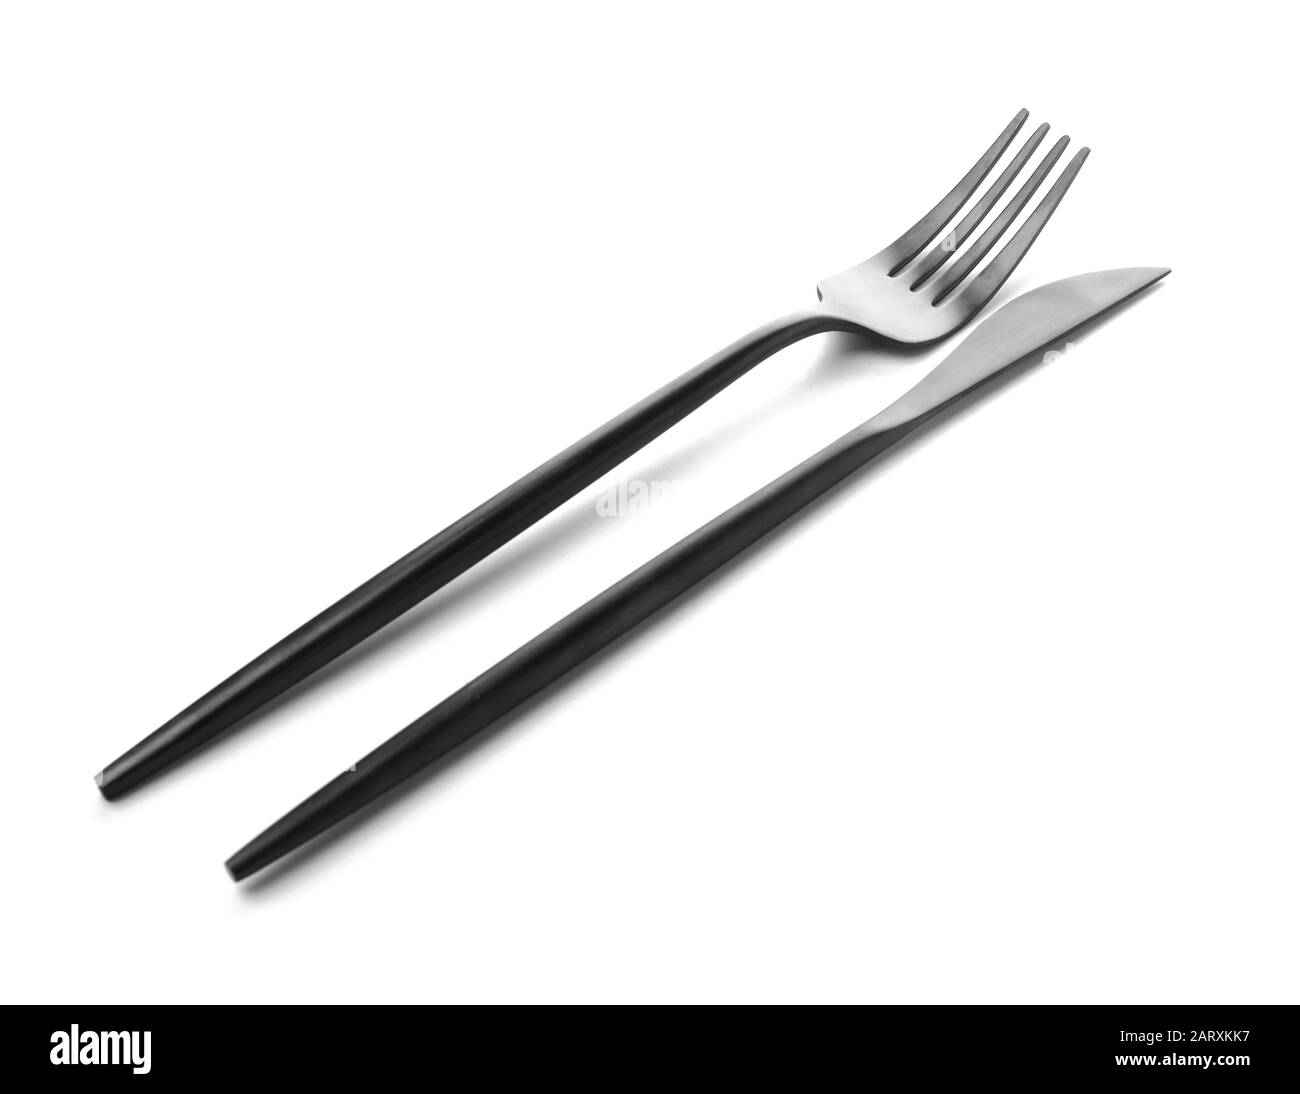 Clean cutlery on white background Stock Photo